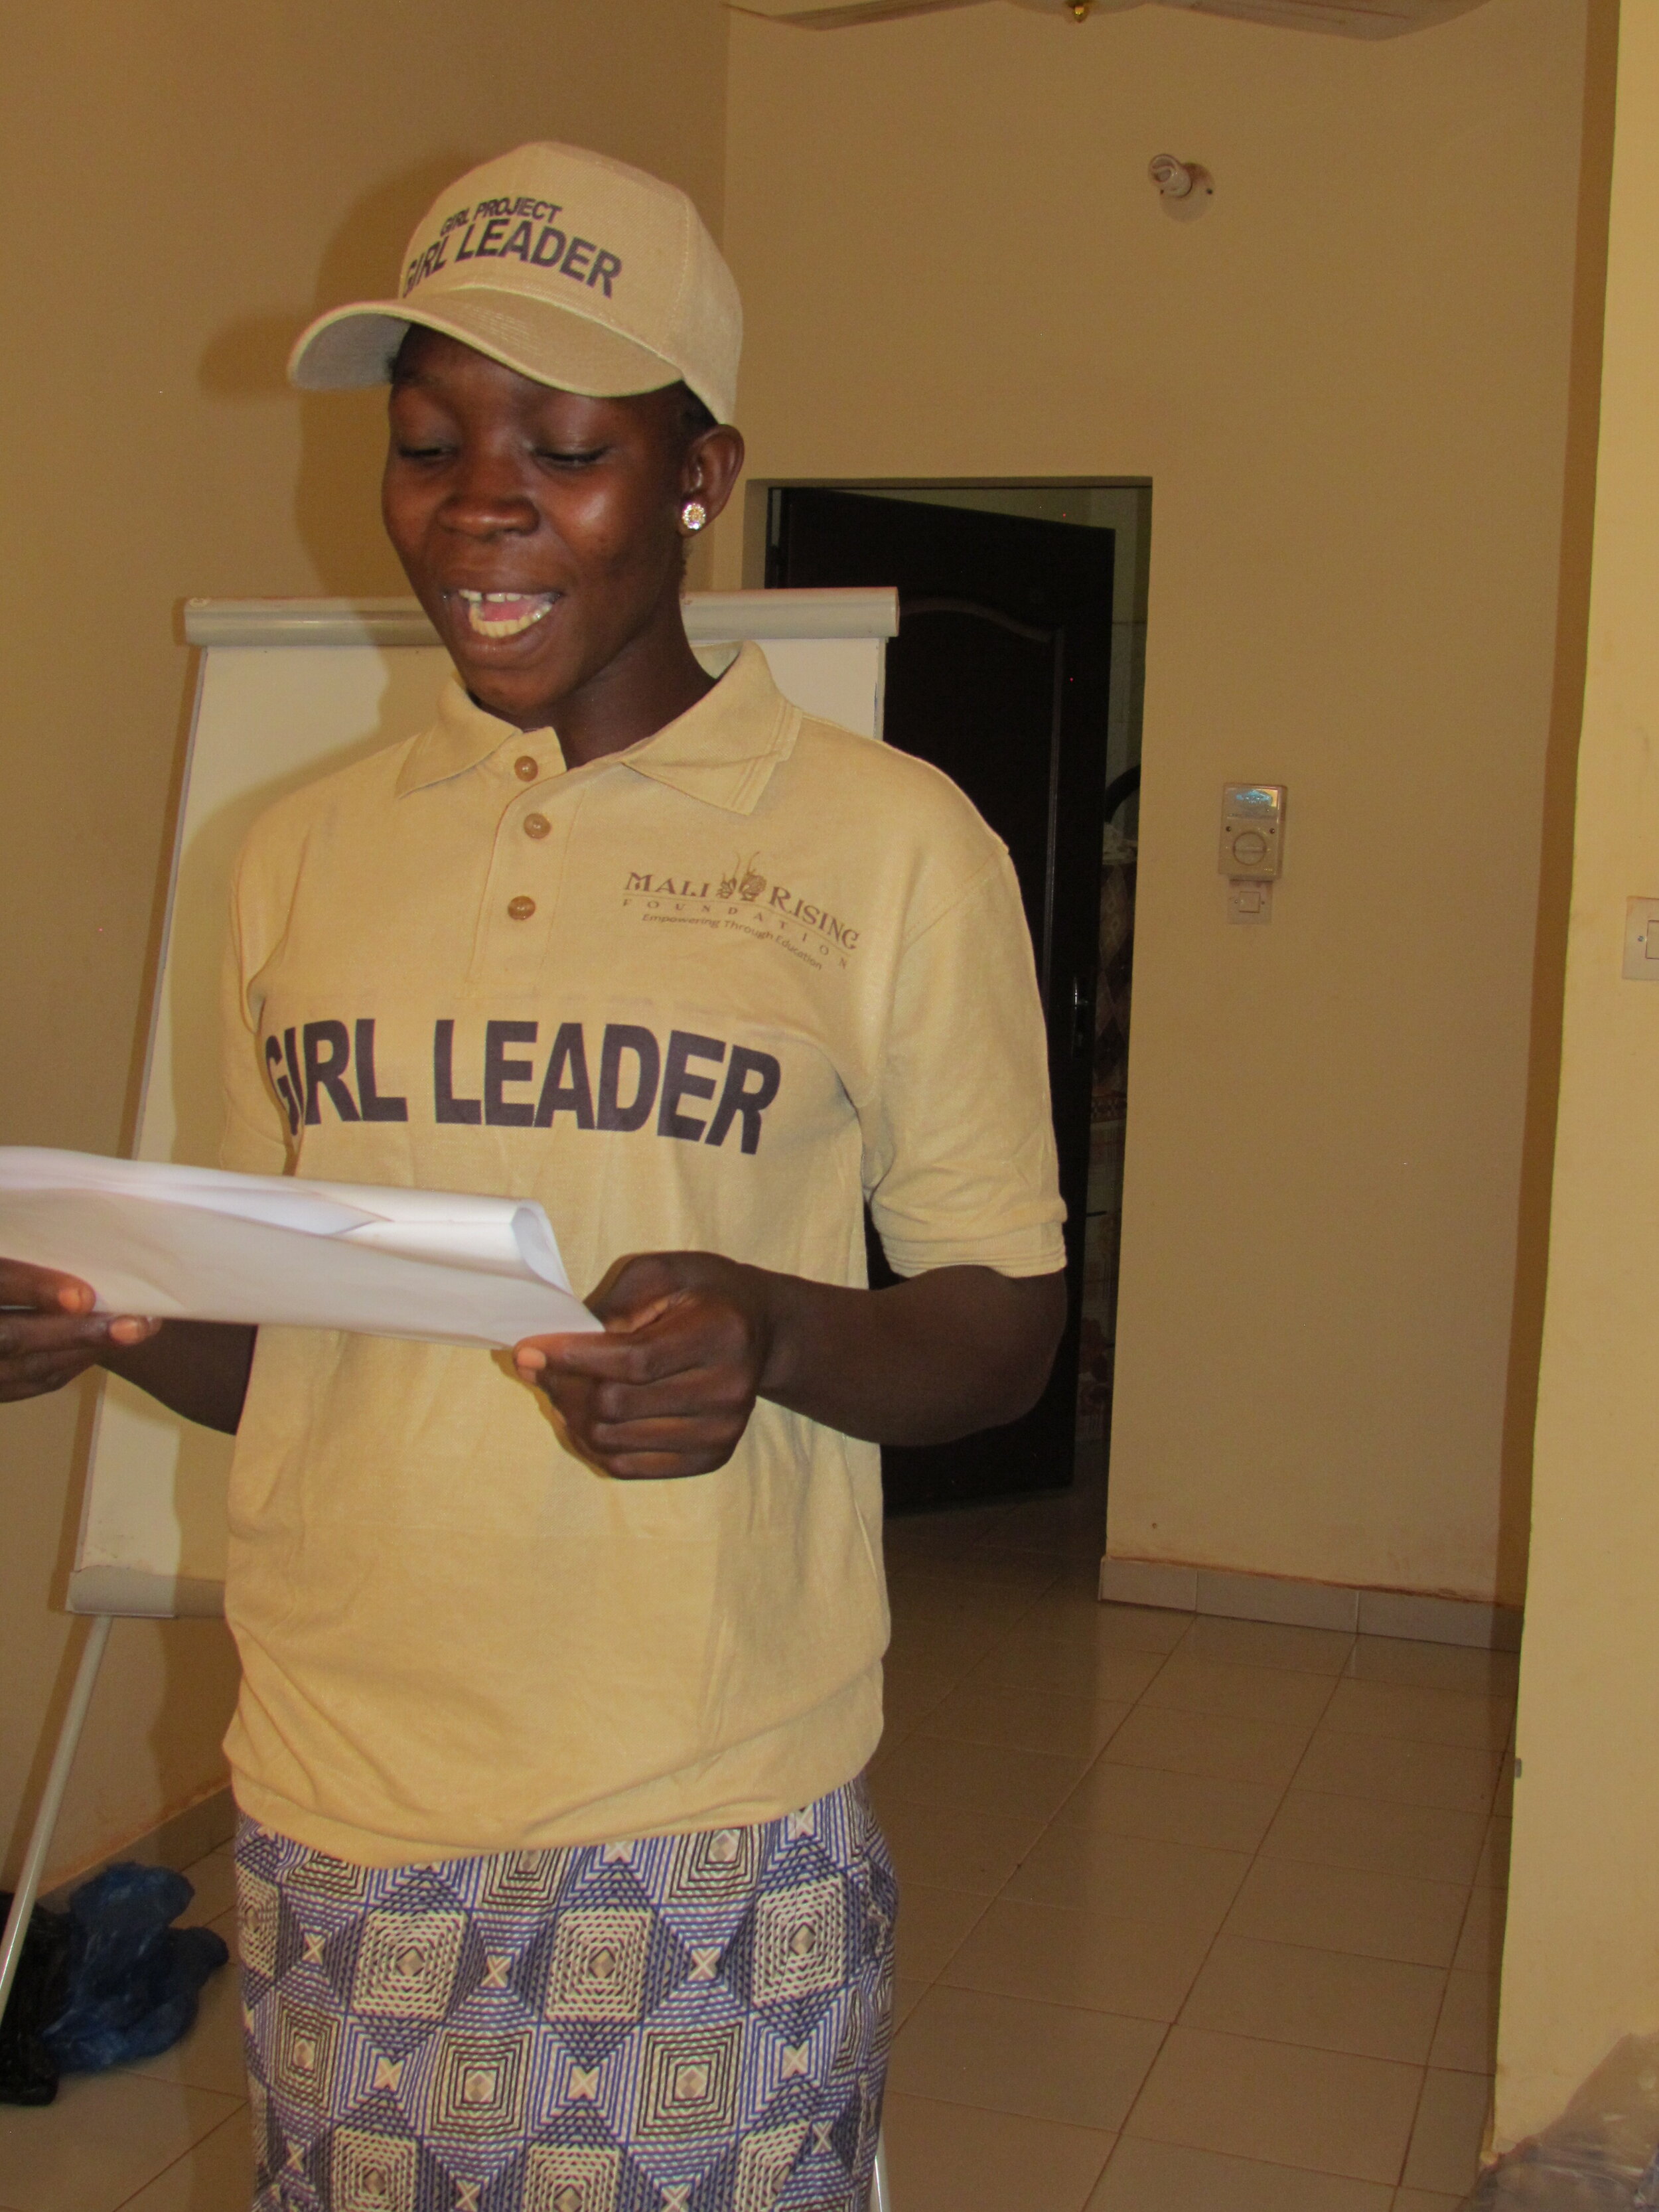 Tenimba practices her leadership skills at our Girl Leader training in September.